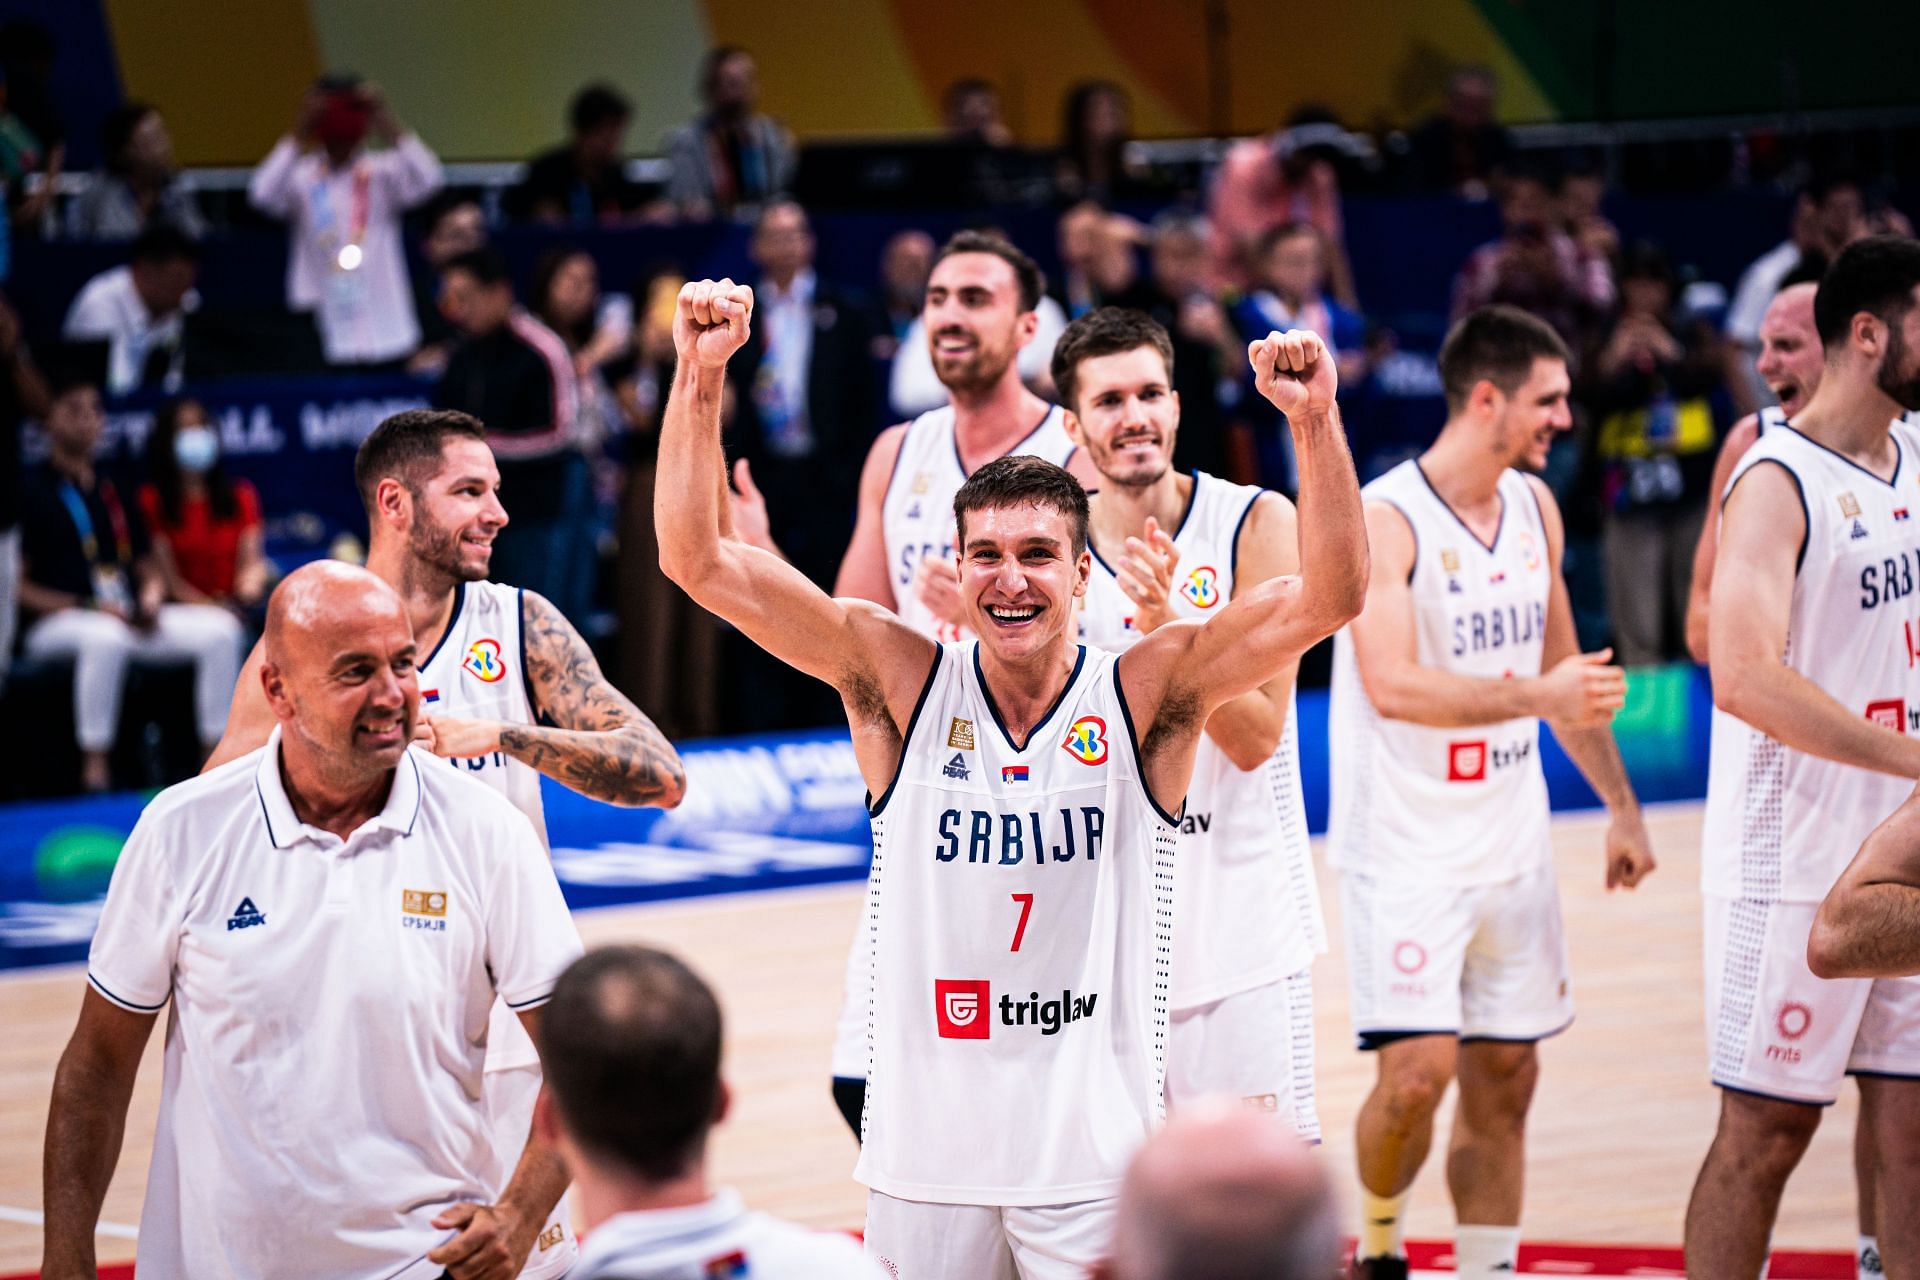 Bogdan Bogdanovic set FIBA World Cup history in what he thought was Serbia